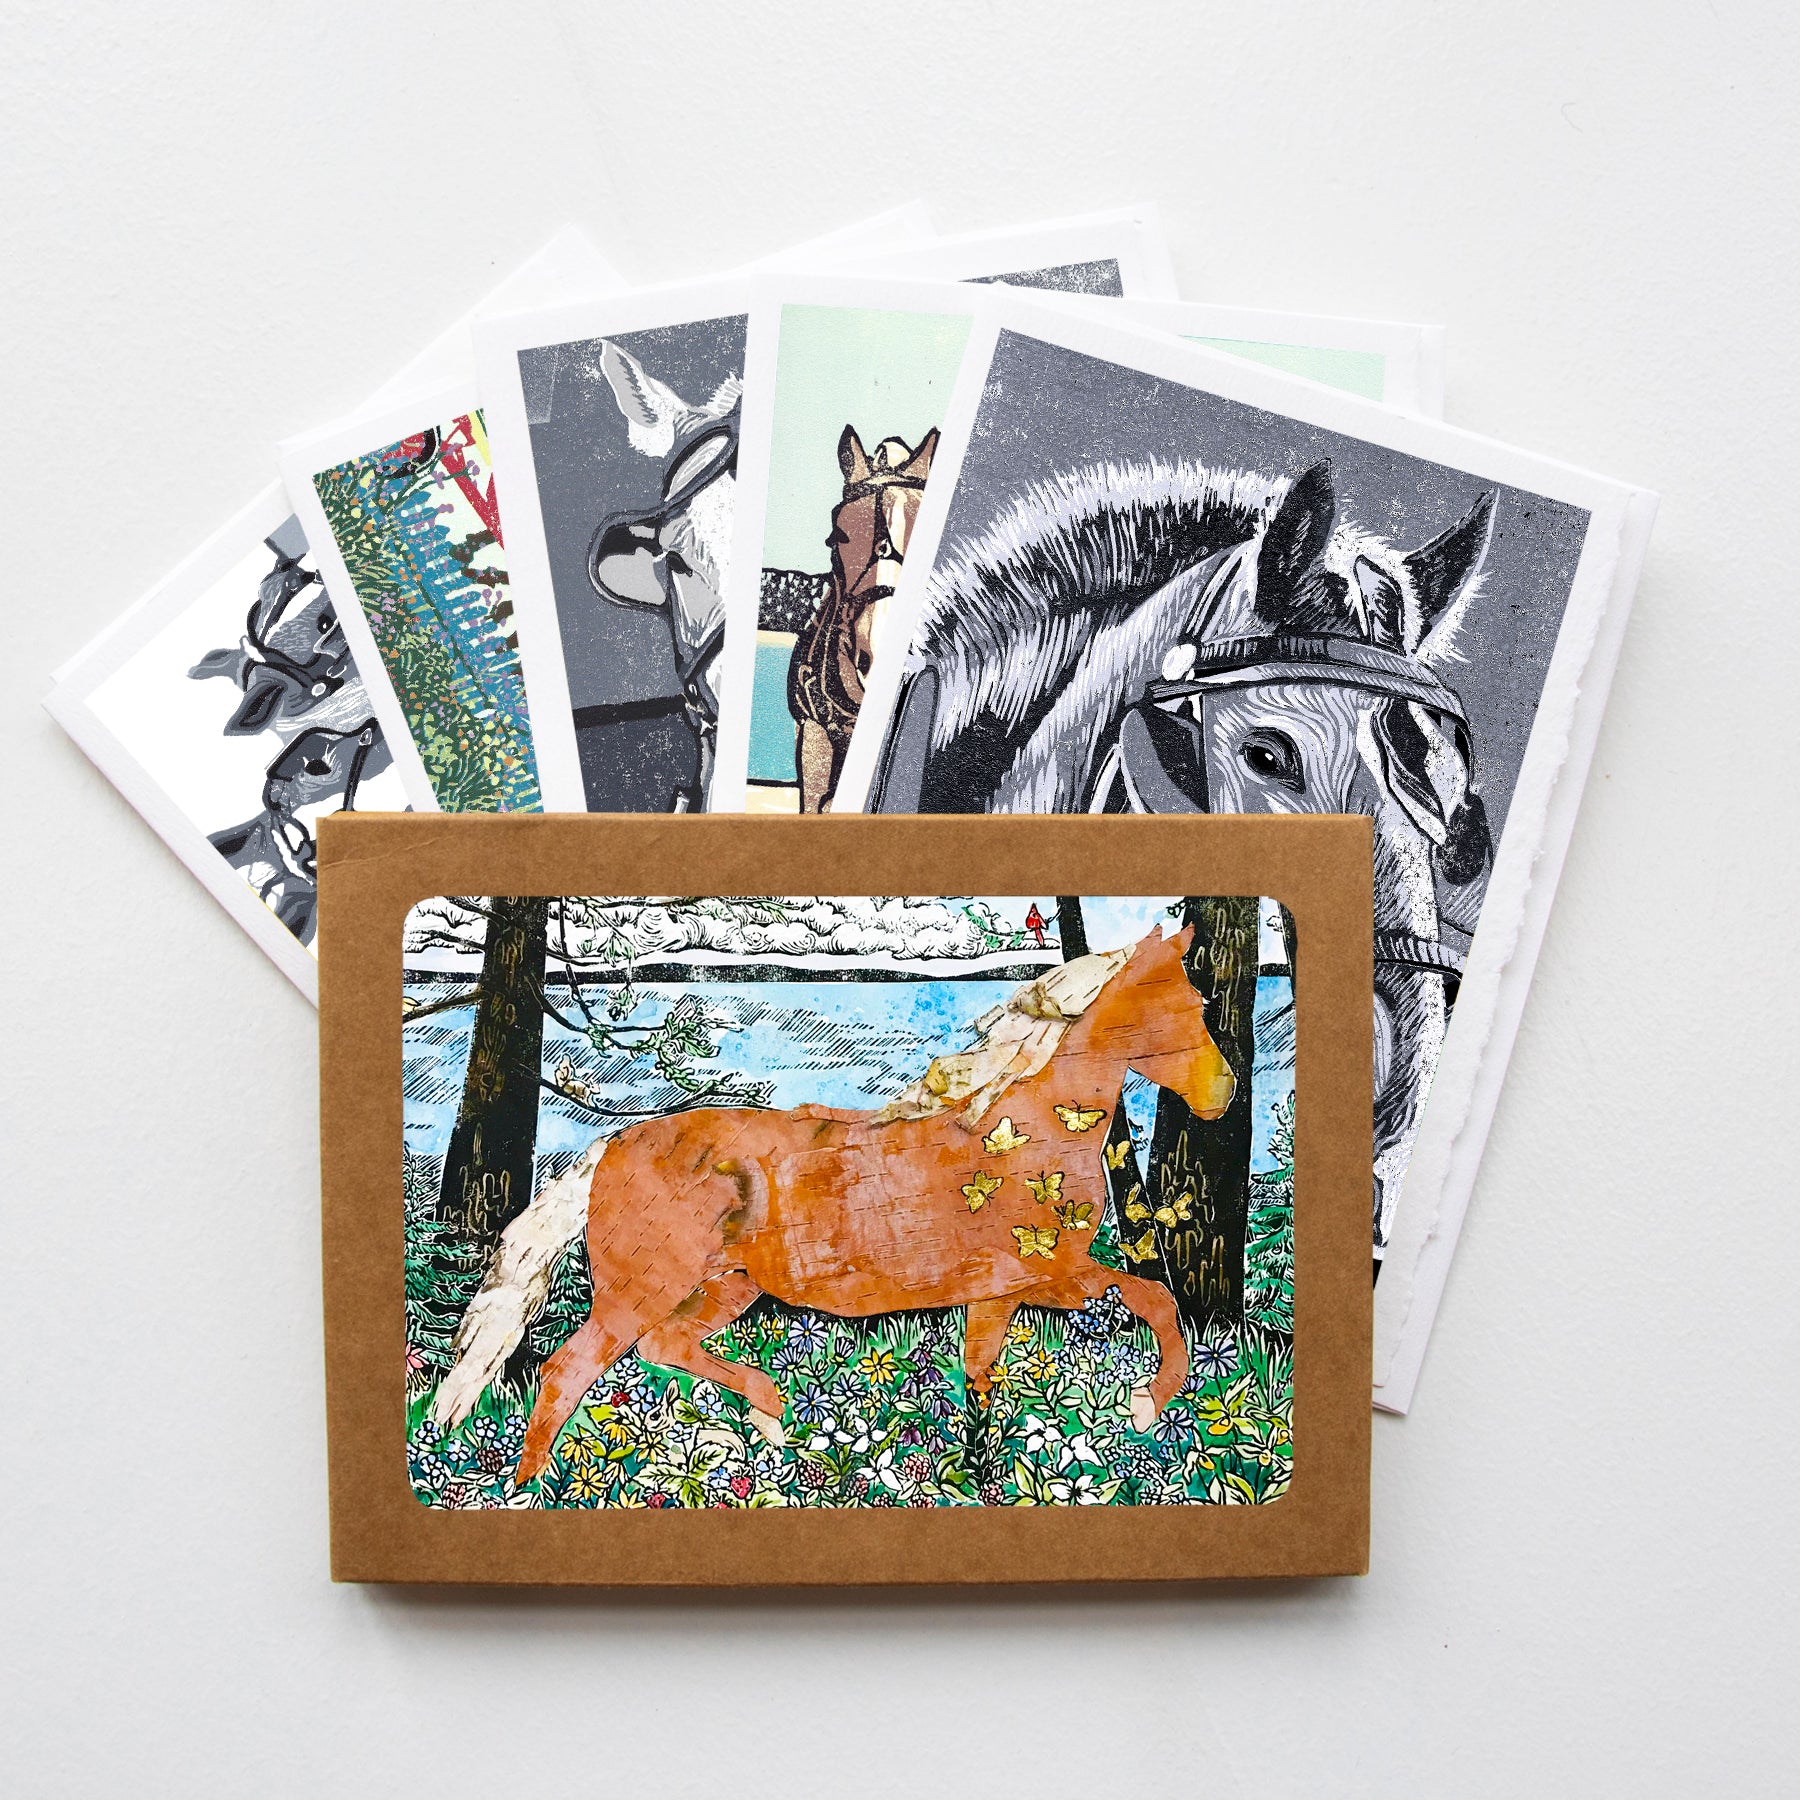 A casually elegant card set featuring horse art by Natalia Wohletz.